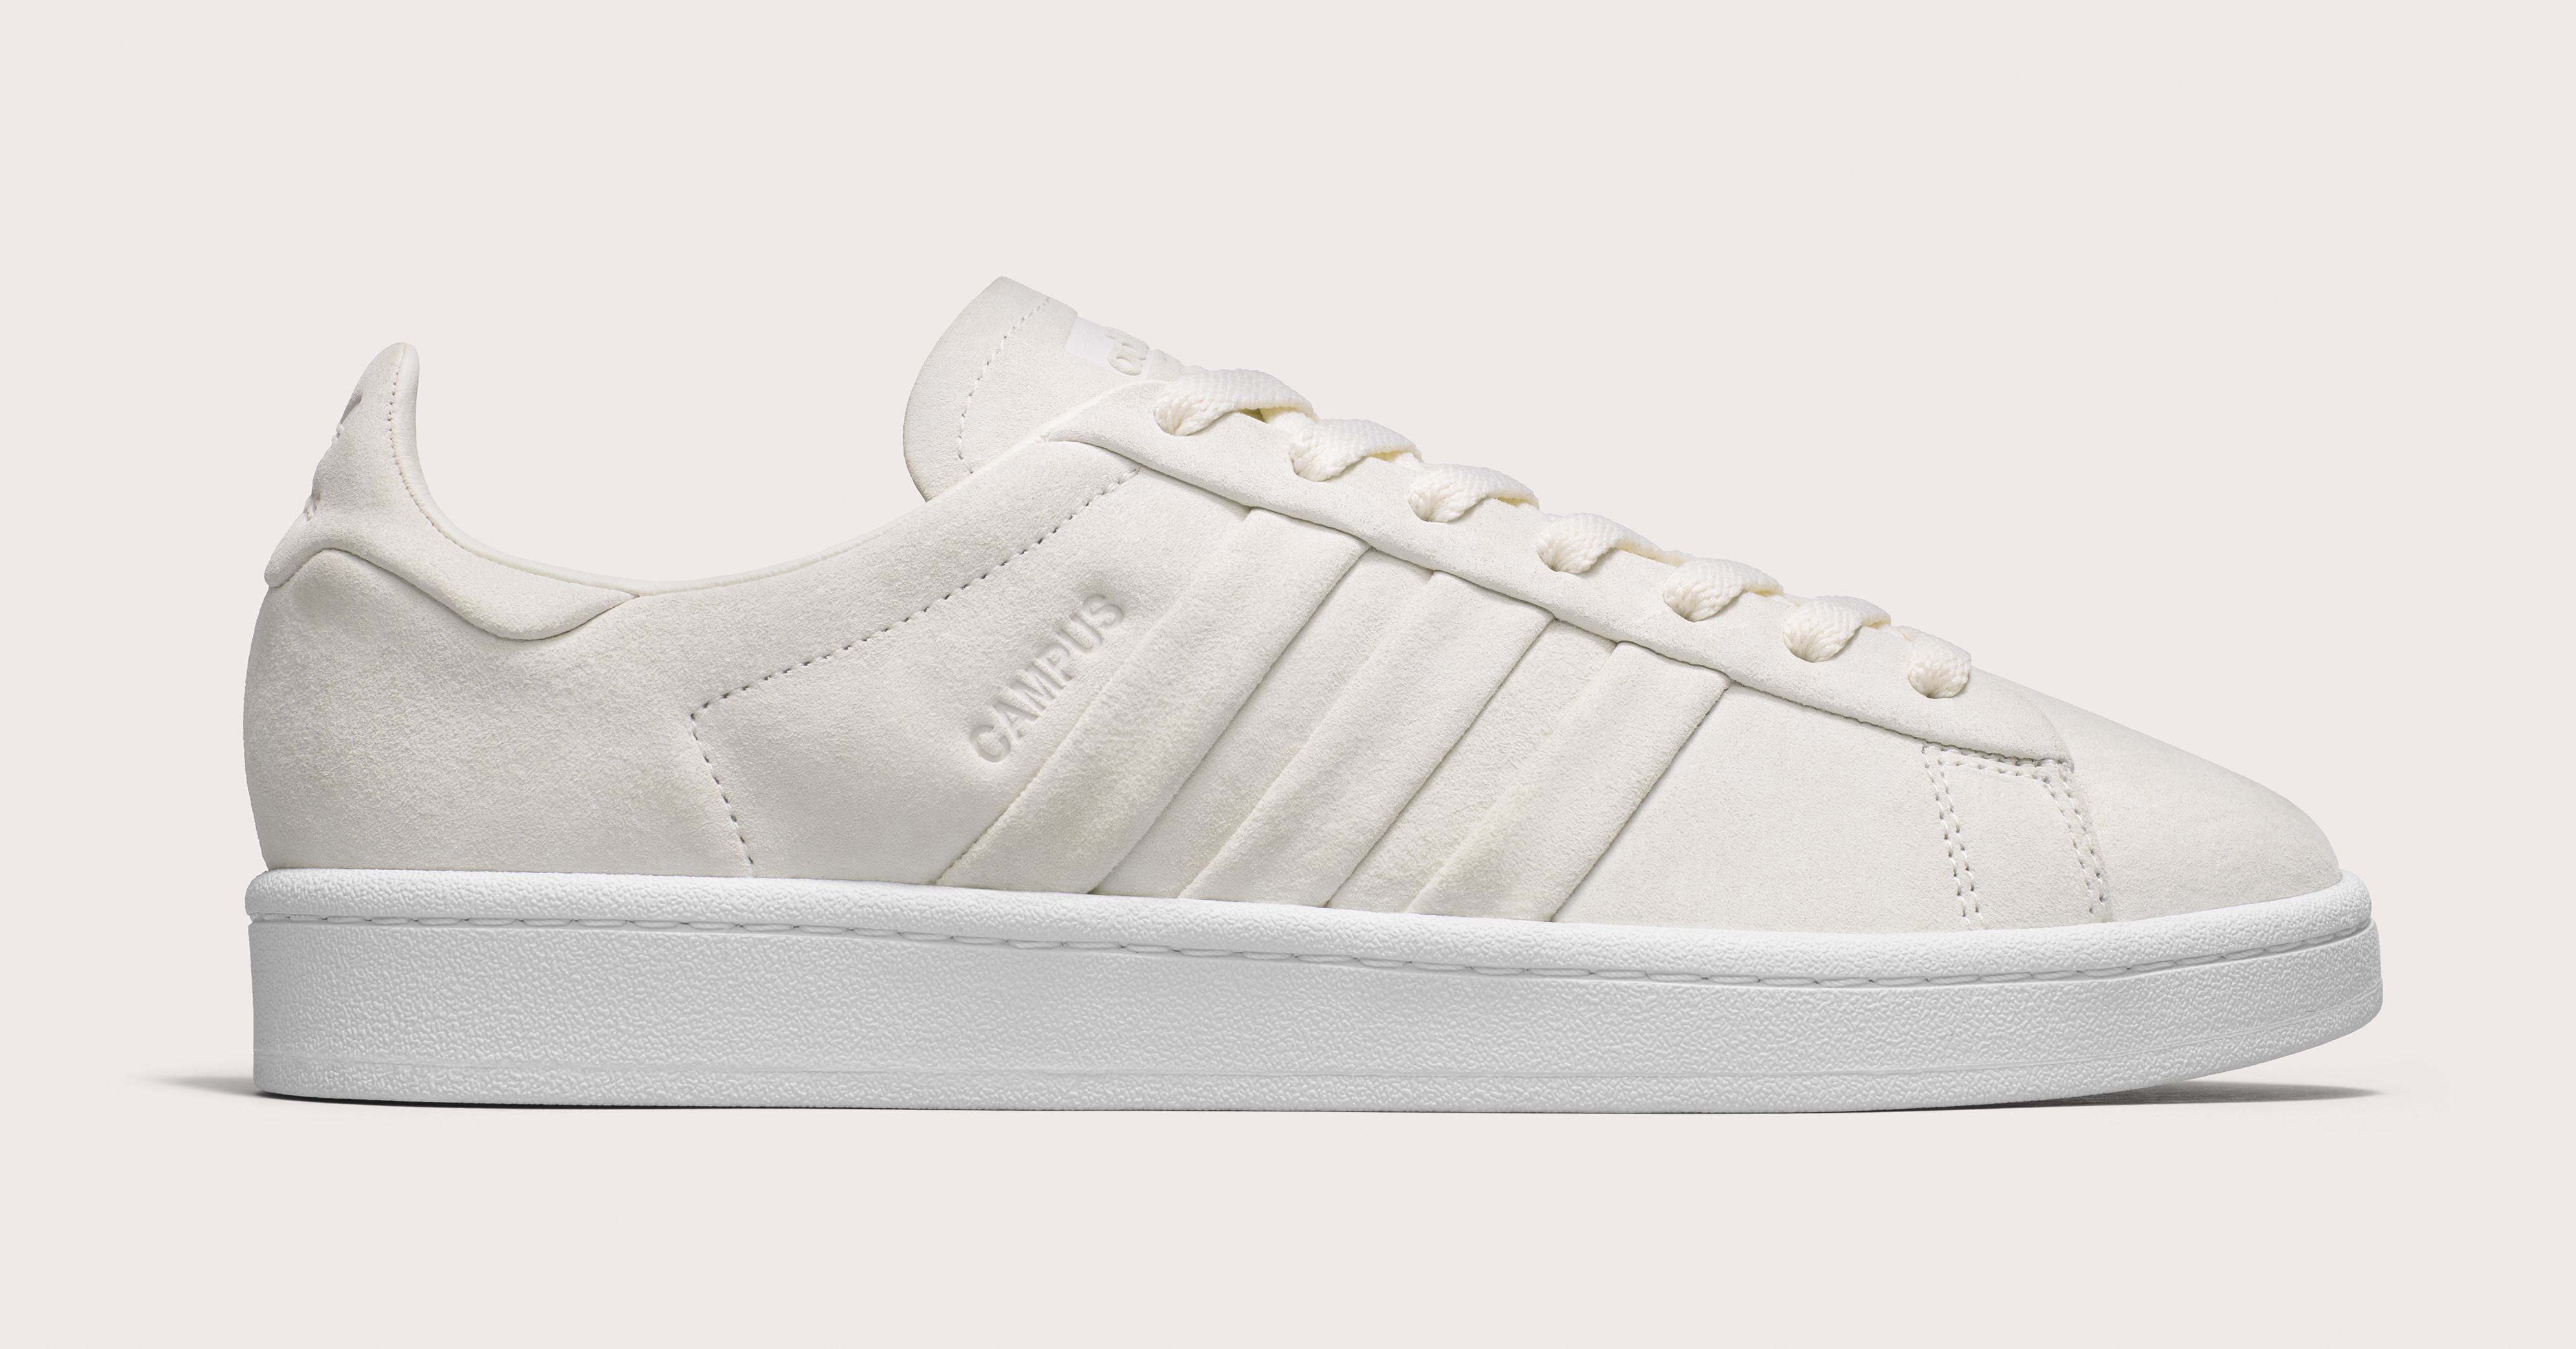 landlady pepper article Adidas 'Stitch and Turn' Pack Campus BB6744 BB6745 Gazelle CQ2358 CQ2359  Release Date | Sole Collector